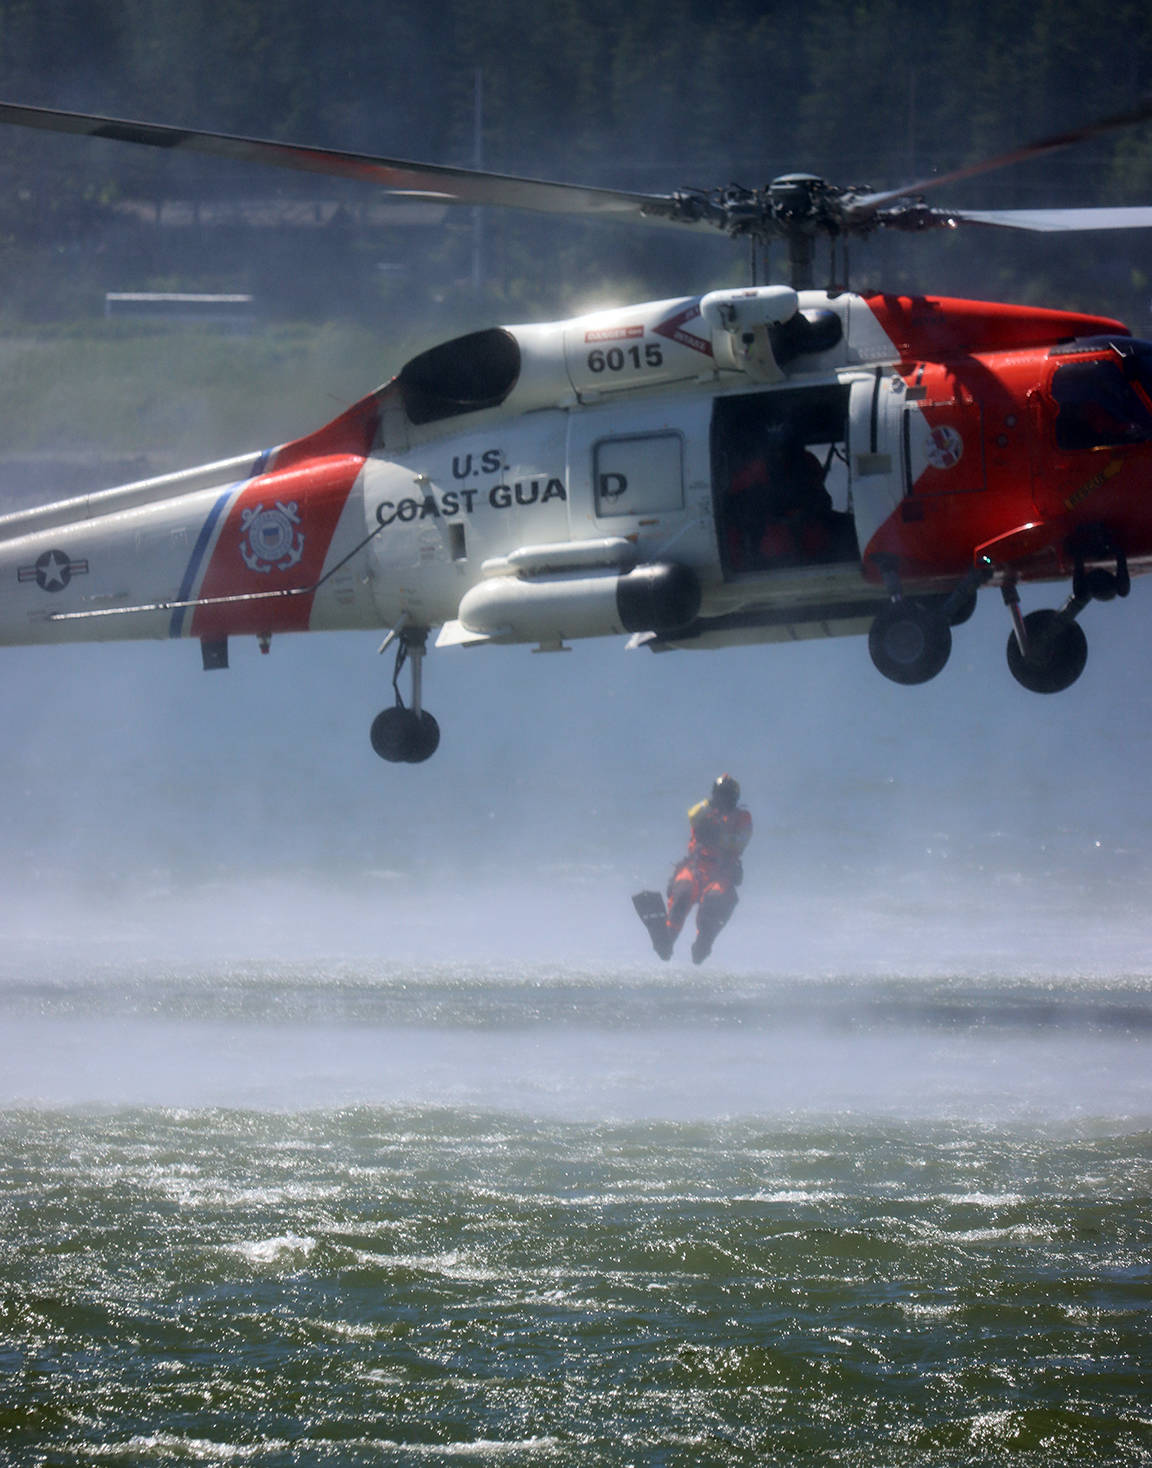 The U.S. Coast Guard demonstrated a water rescue in the Gastineau Channel during the 11th edition of the Juneau Maritime Festival. However, before a person could be retrieved from the water, they had to make a splashy entrance. (Ben Hohenstatt / Juneau Empire)